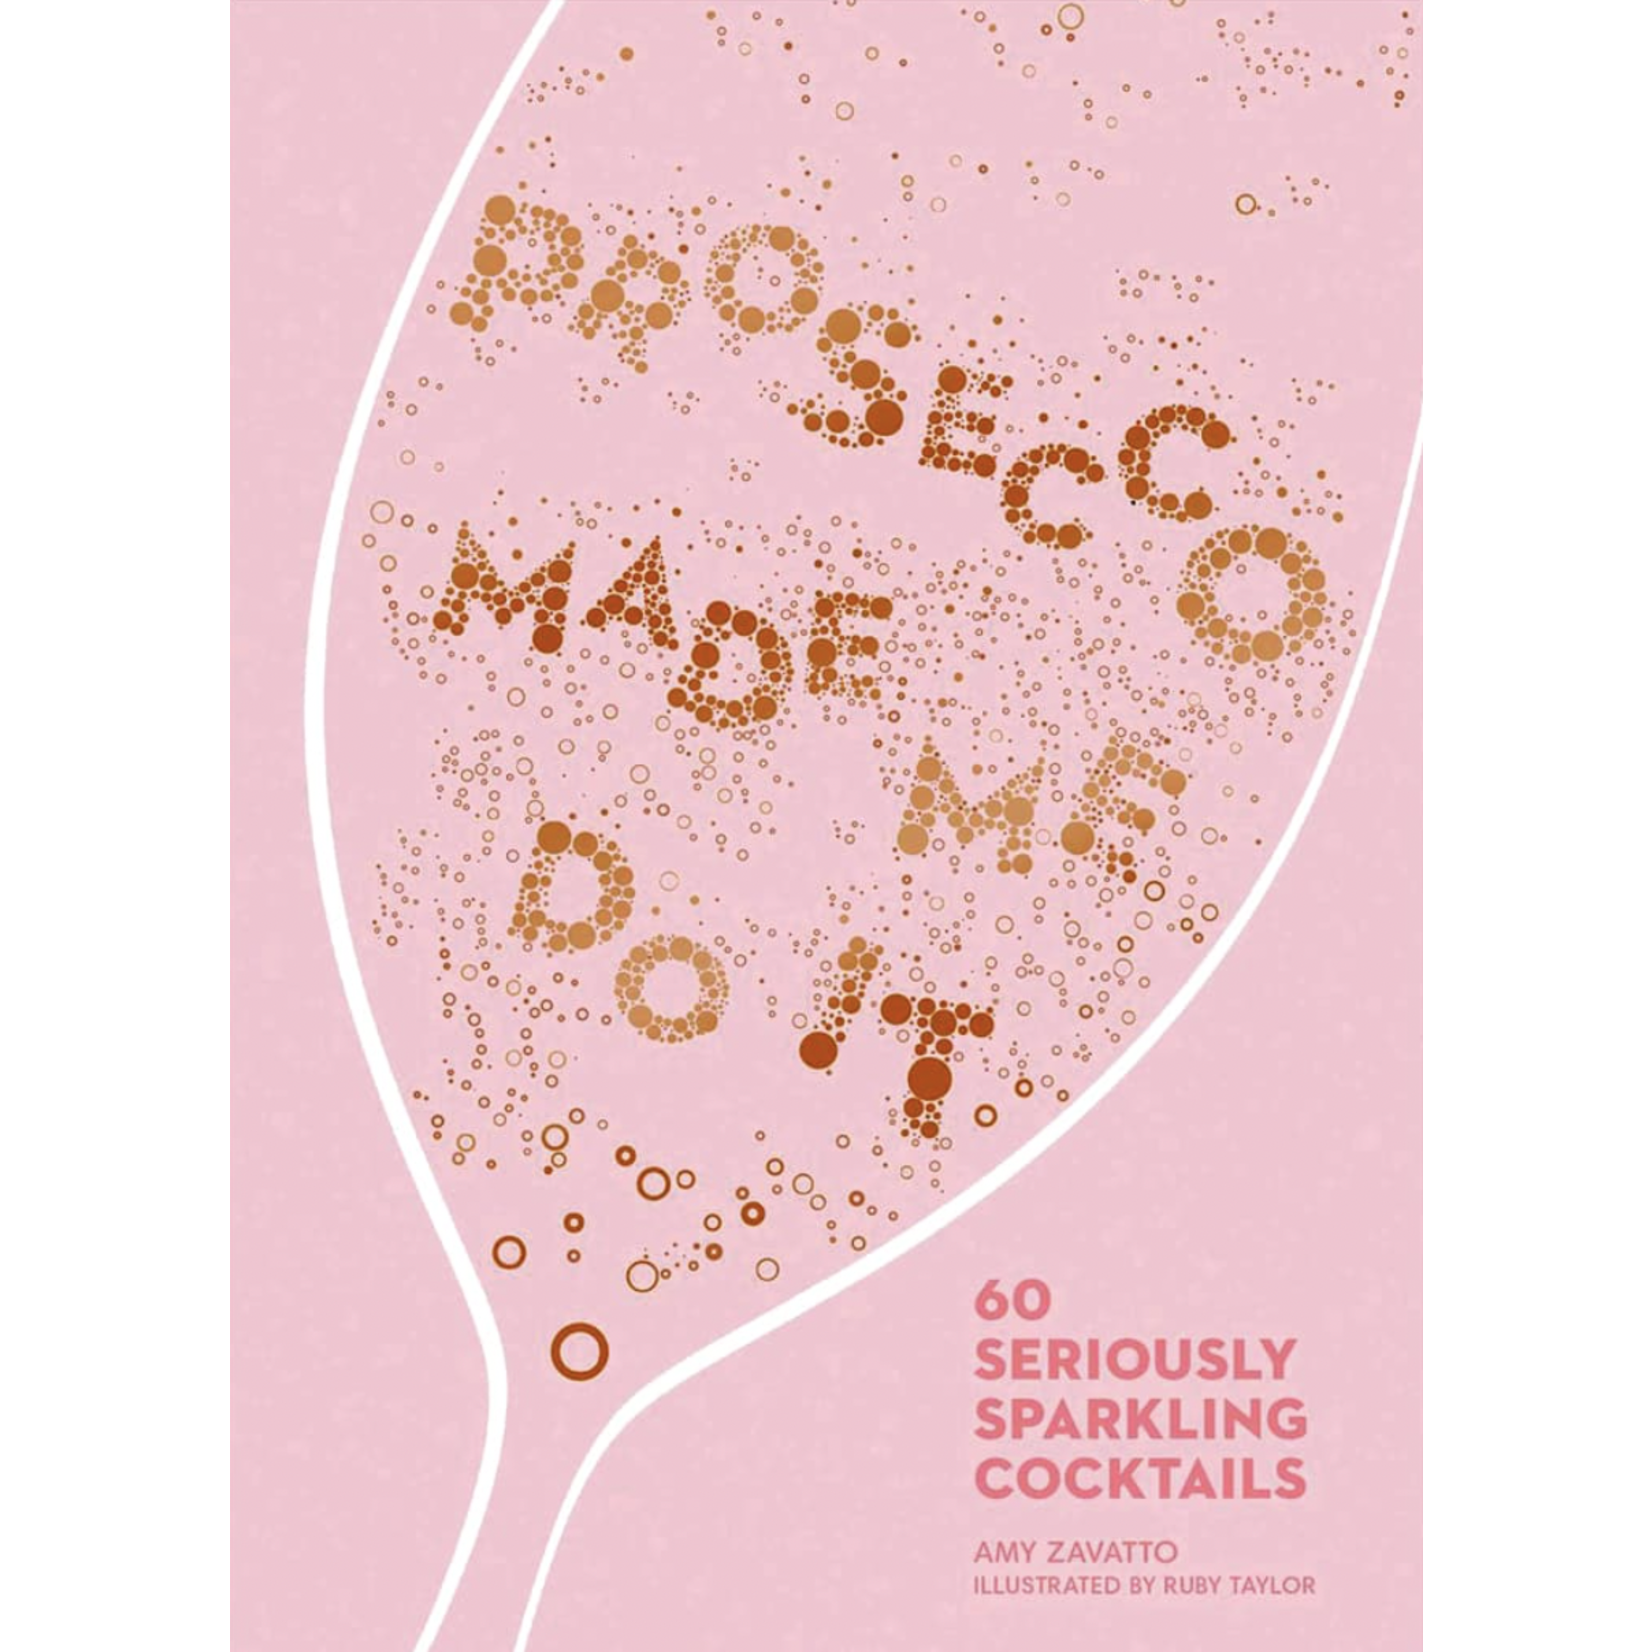 Common Ground Prosecco Made Me Do It